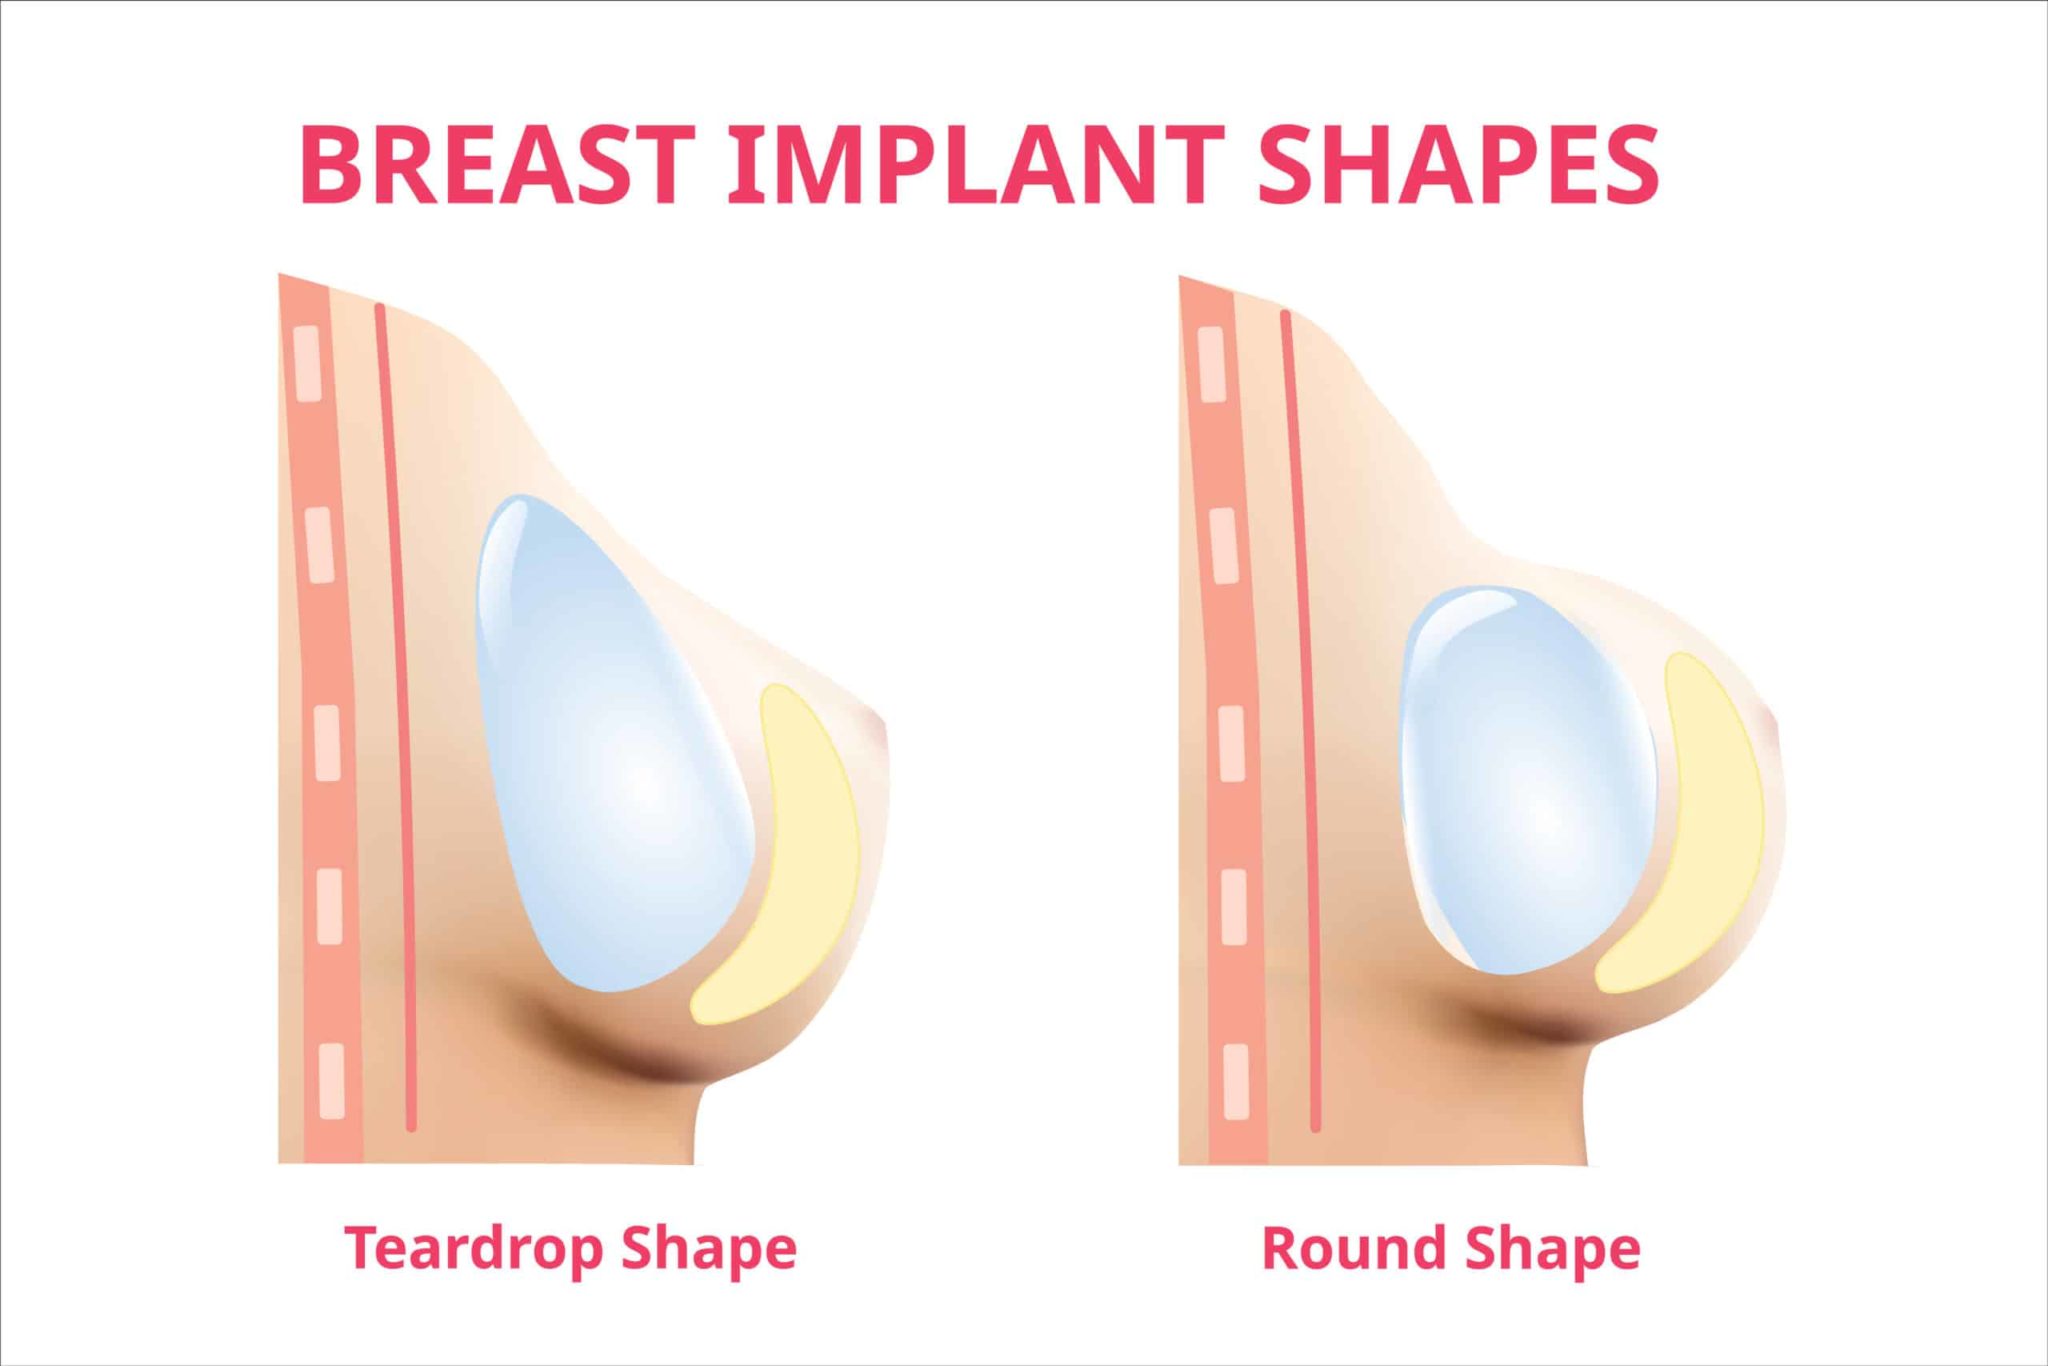 Should I get breast implants under the muscle or over?